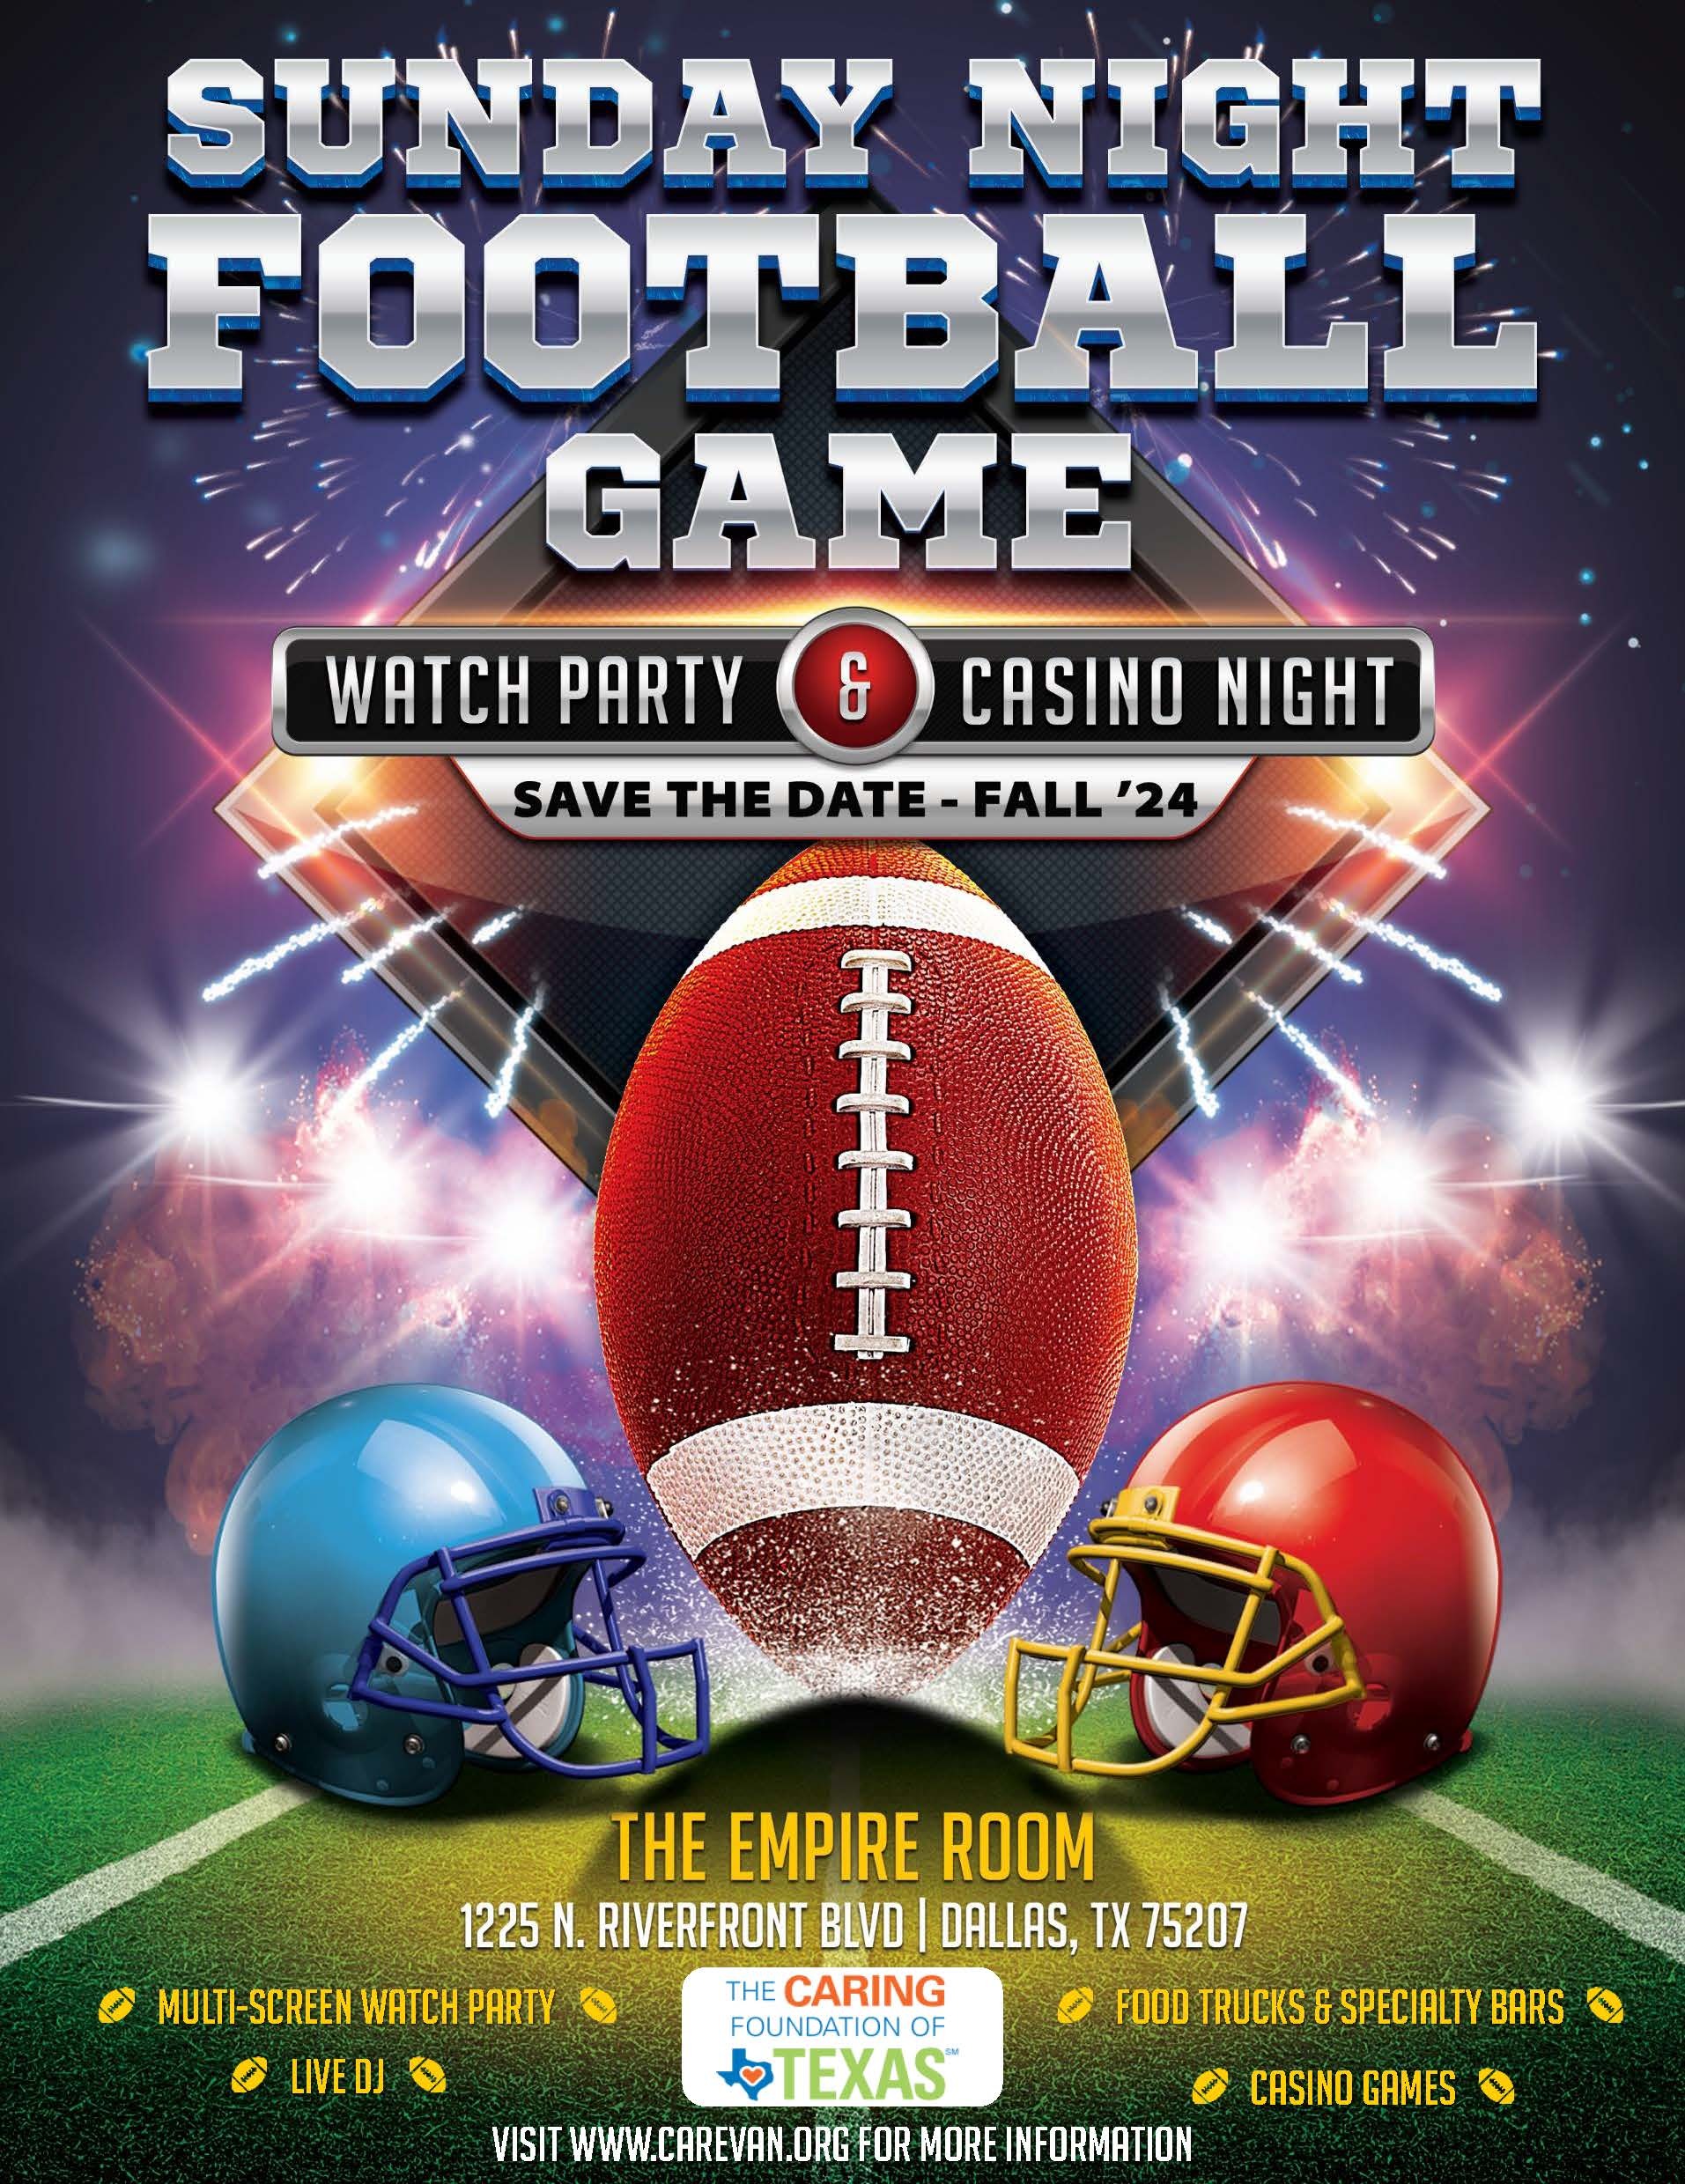 Promotional poster for a Sunday night football game viewing party at the Empire Room in Dallas, Texas, featuring a football and helmets, with event details for fall '24.